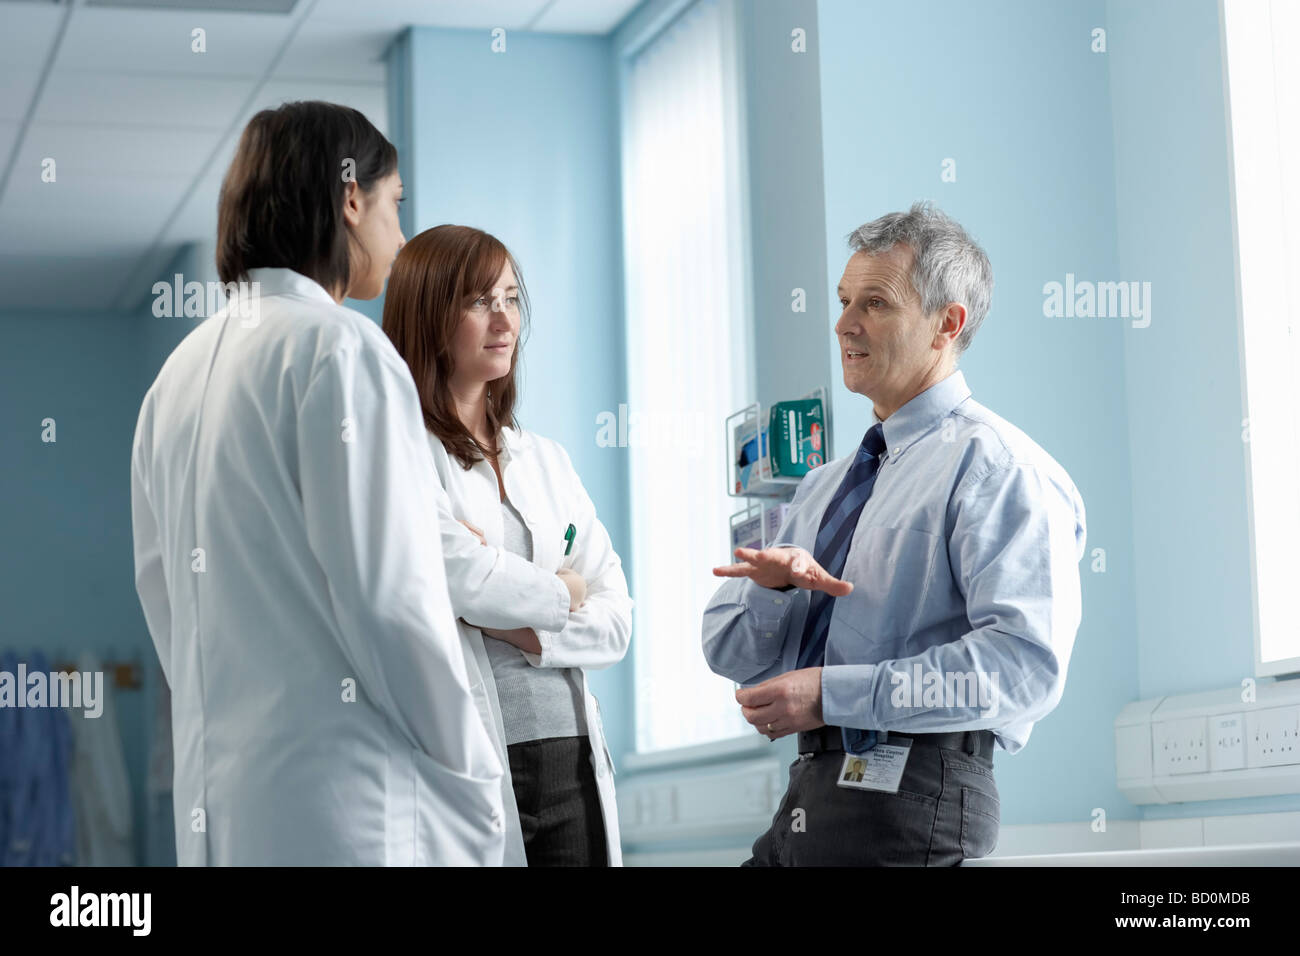 3 doctors in discussion Stock Photo